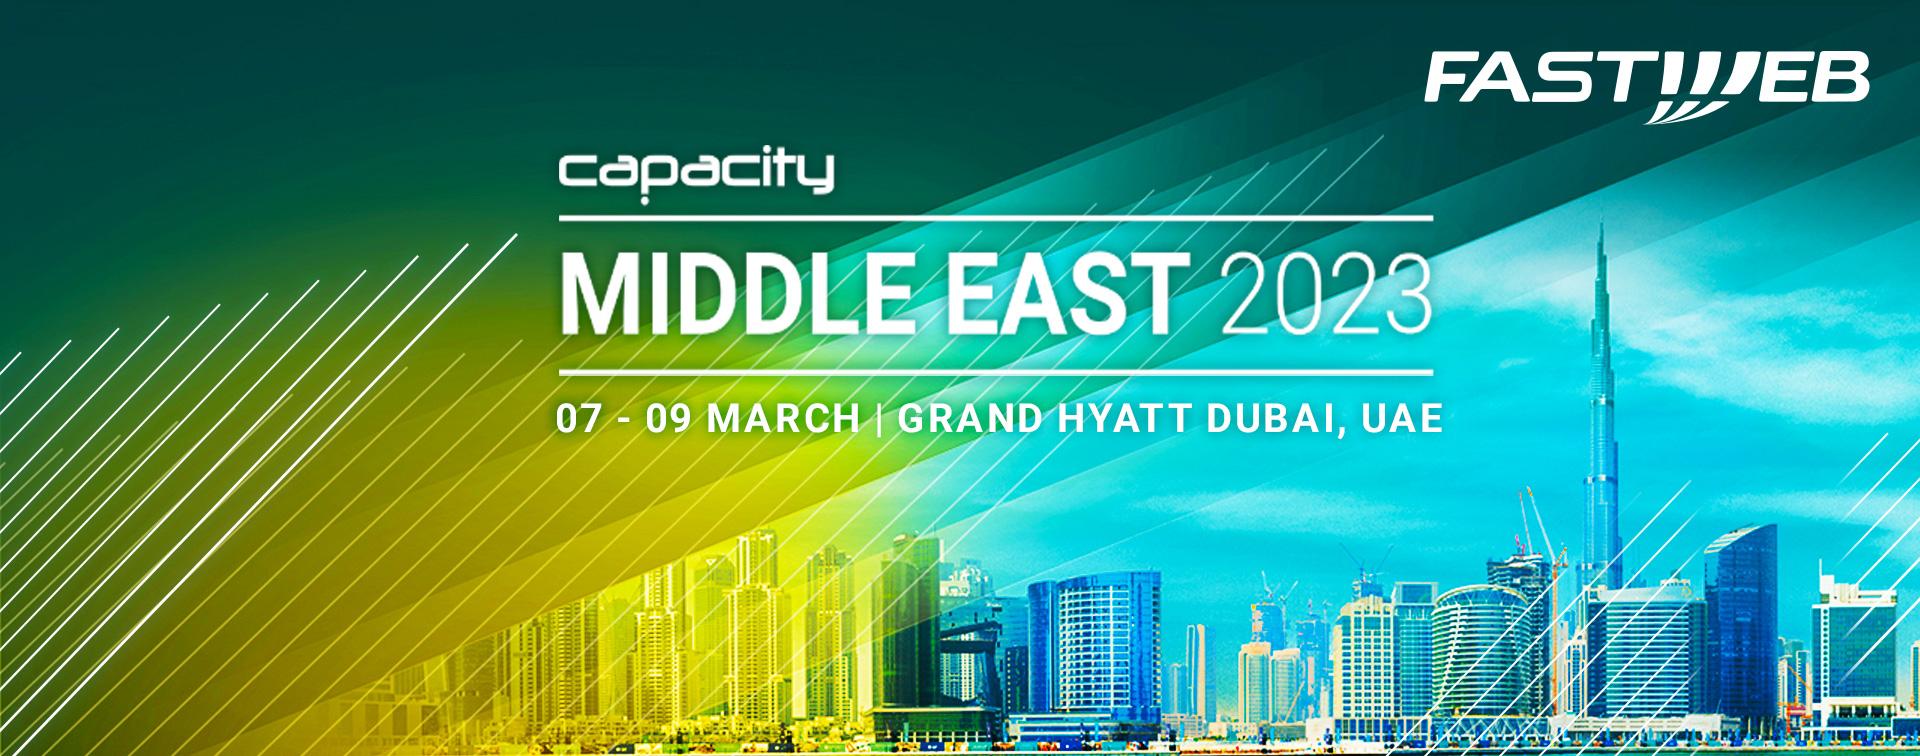 Meet the Fastweb Wholesale Team at the Capacity Middle East